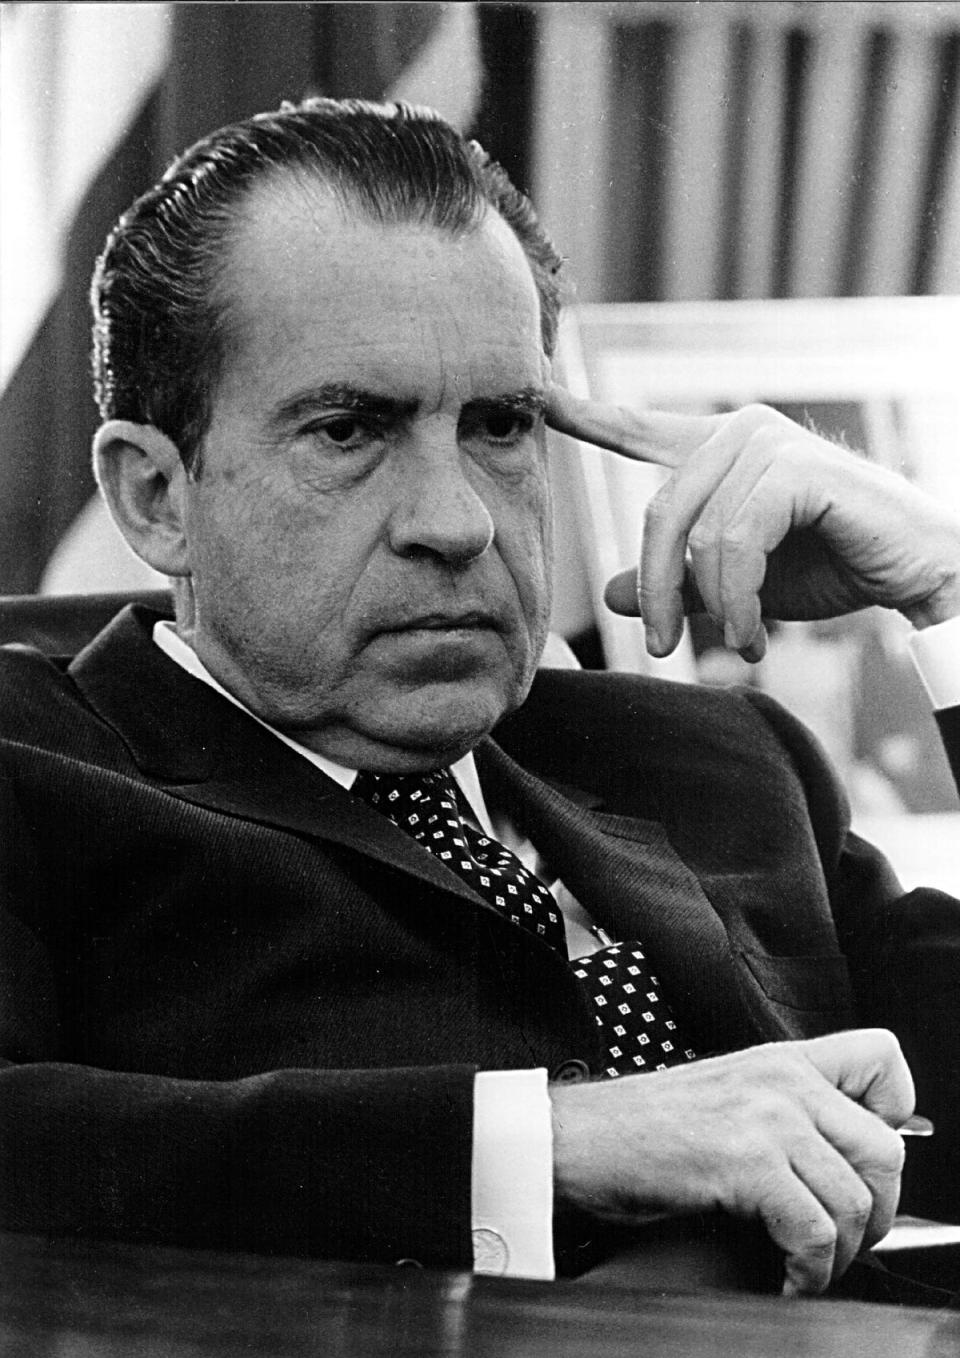 President Richard Nixon in the Oval Office on 19 February 1970 (Getty Images)